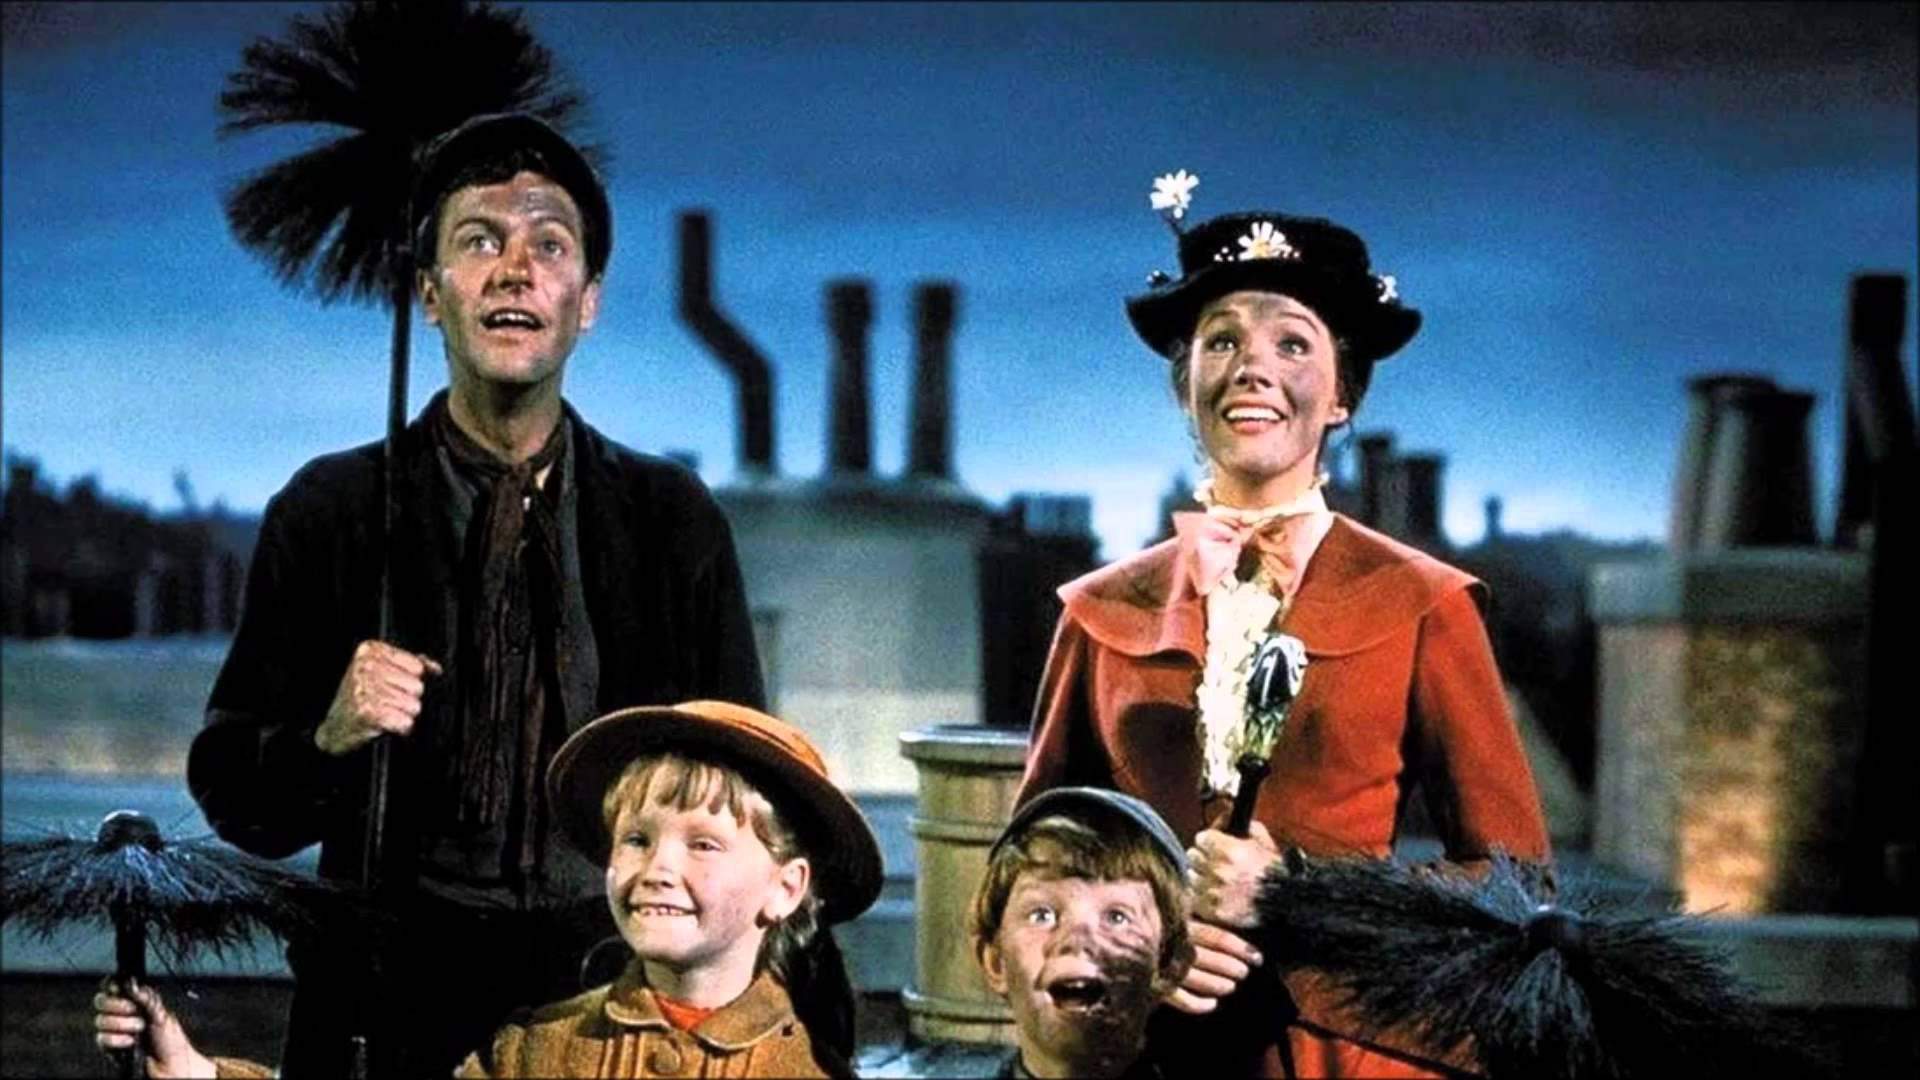 This New Regional Australian Museum Celebrates All Things 'Mary Poppins'